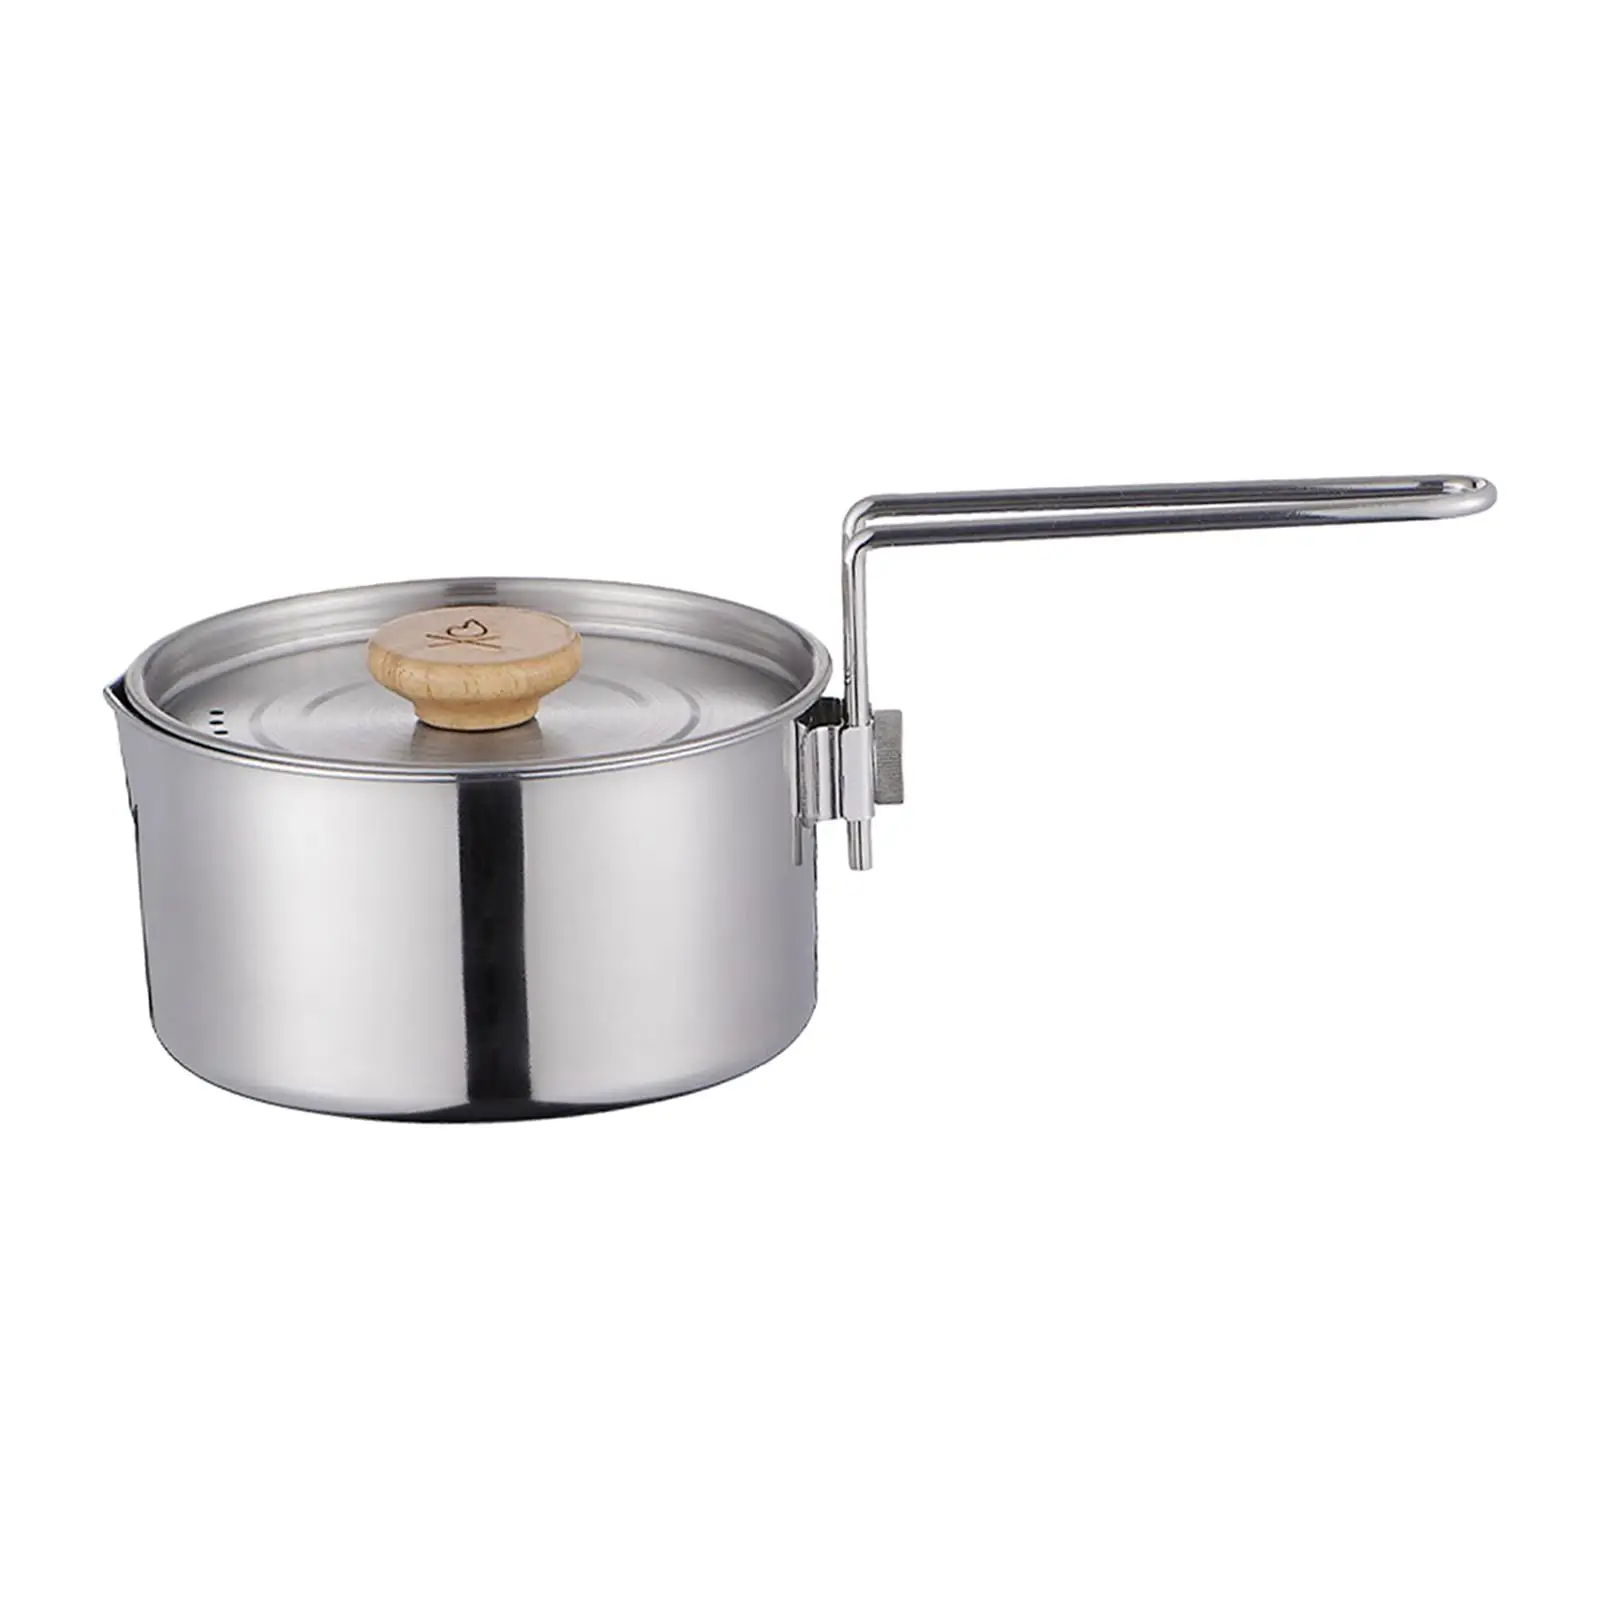 Portable Cooking Pot Campfire Kettle Coffee Pot Cookware for Hiking Picnic